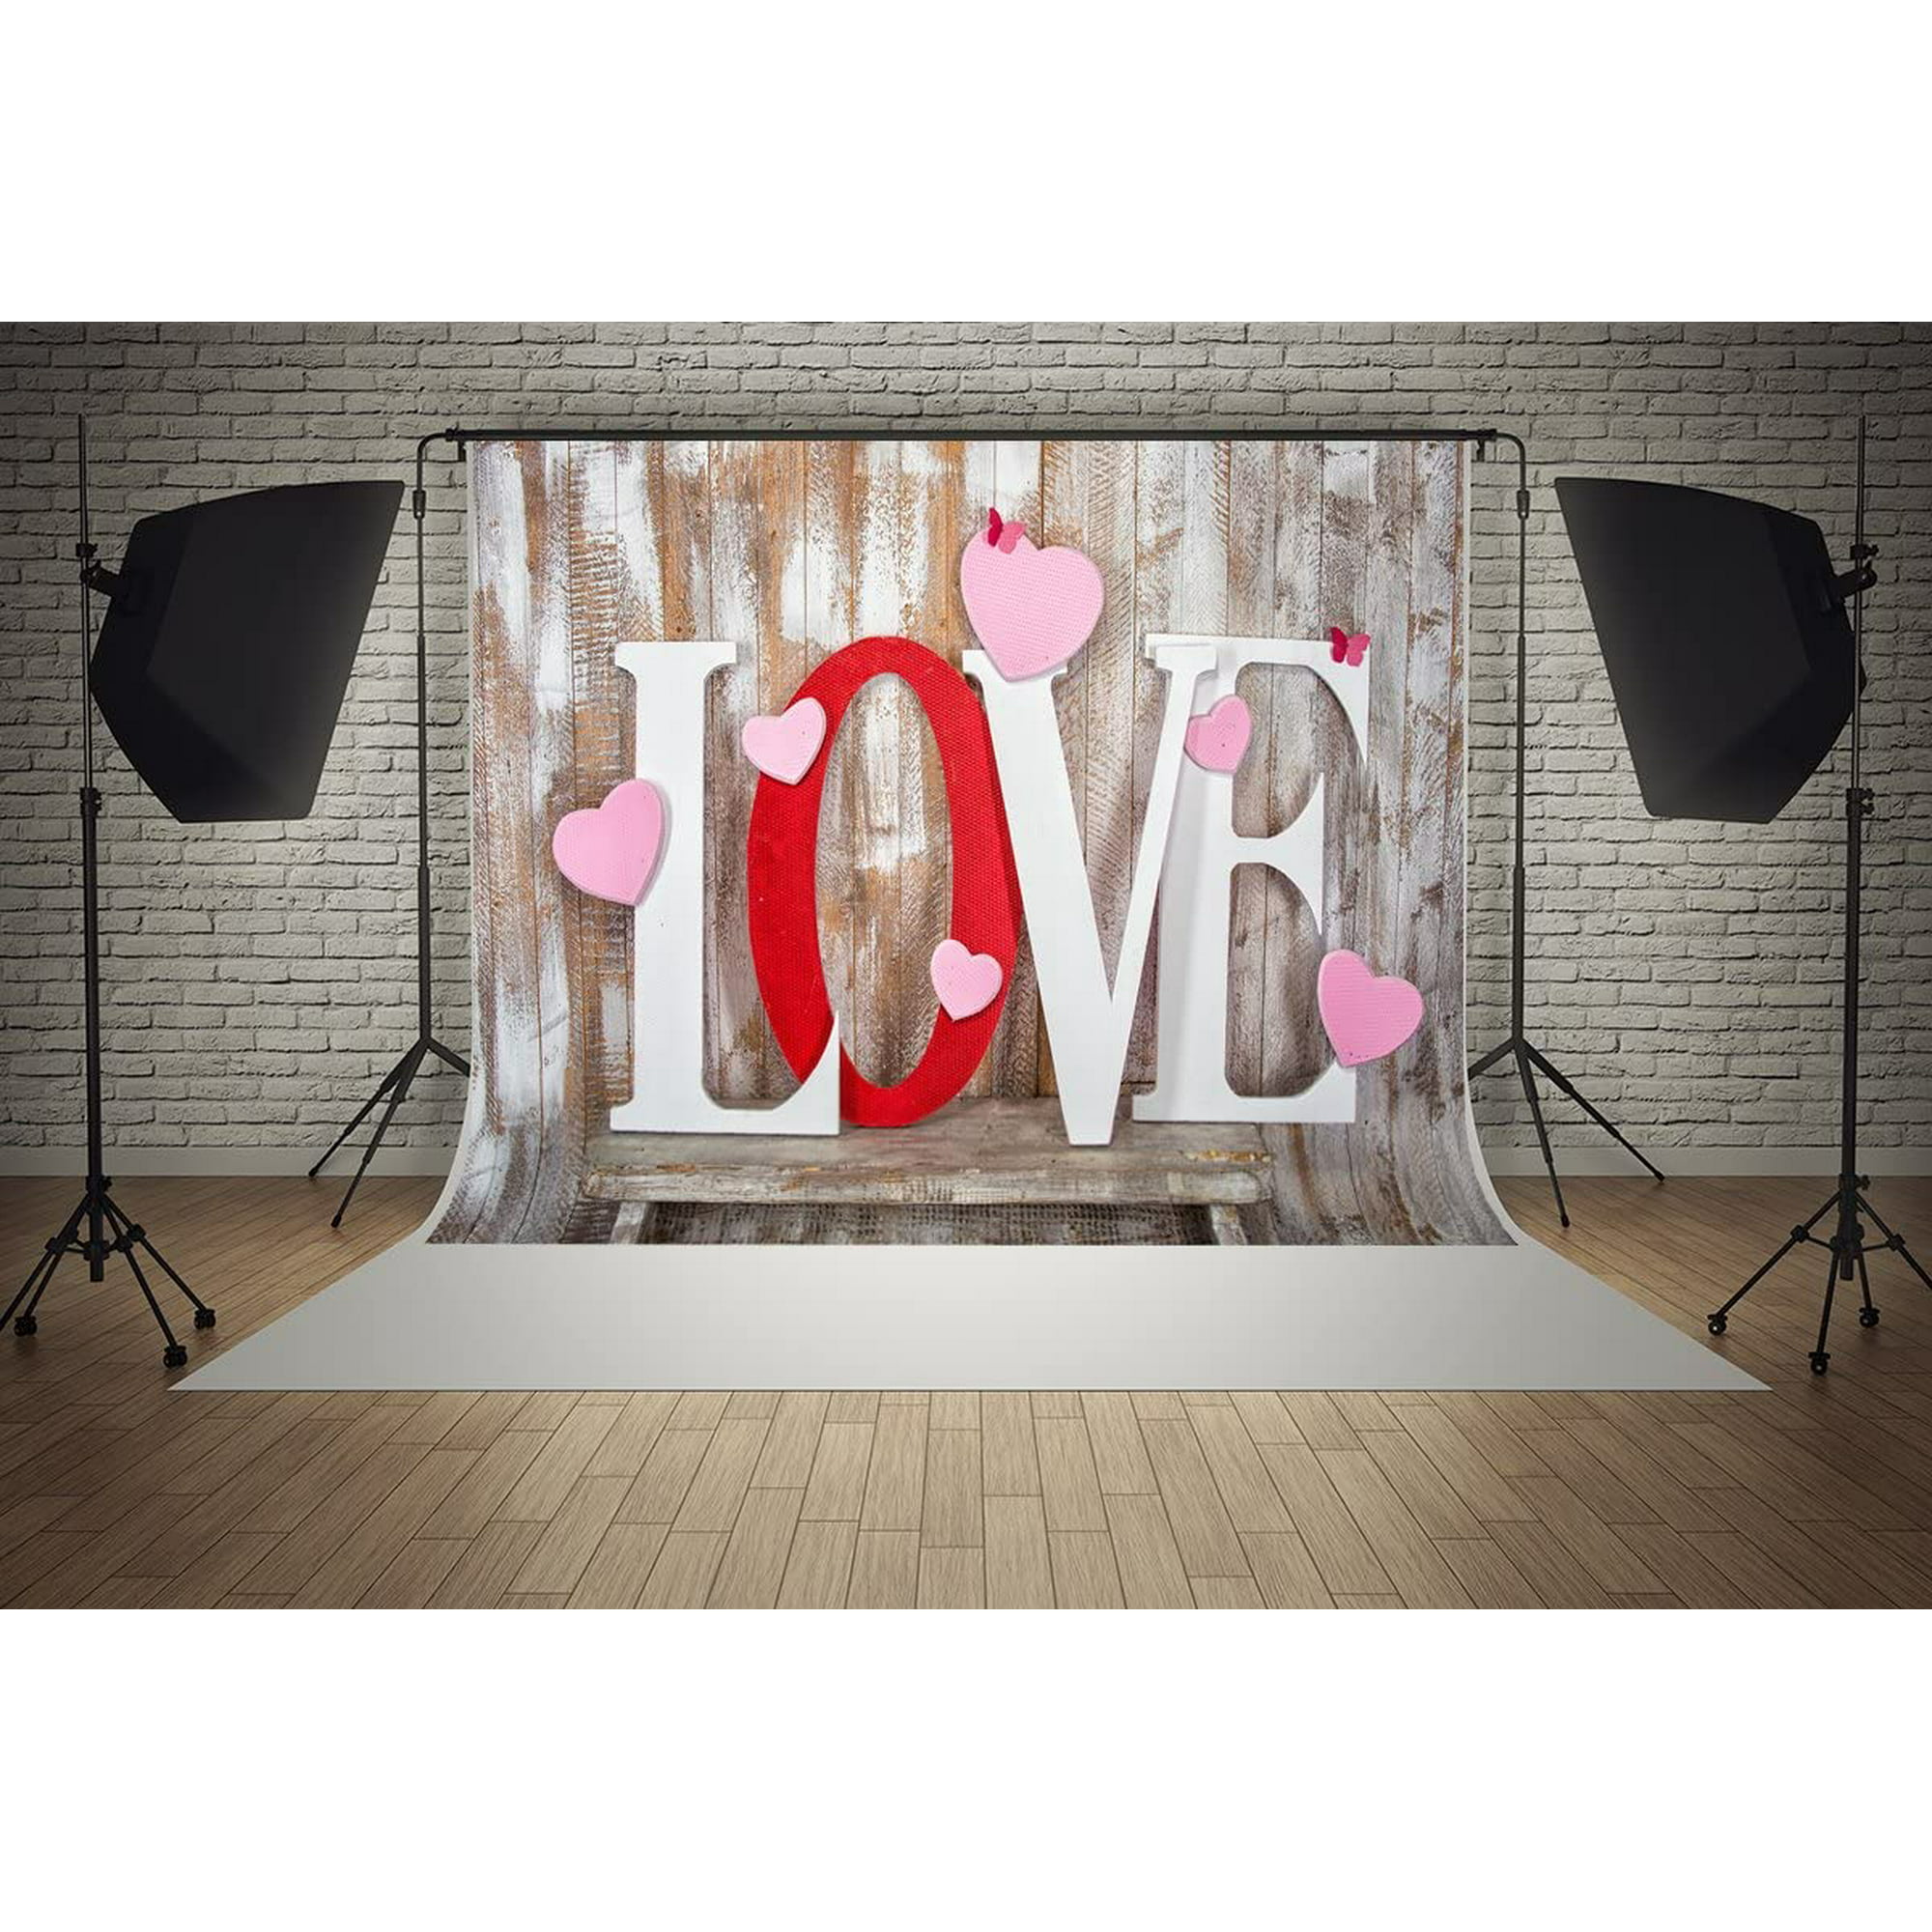 7ft(W) x 5ft(H) Mother's Day Backgrounds Love Wood Wall Pink Heart Happy  Birthday Wedding Party Decorations Microfiber | Walmart Canada